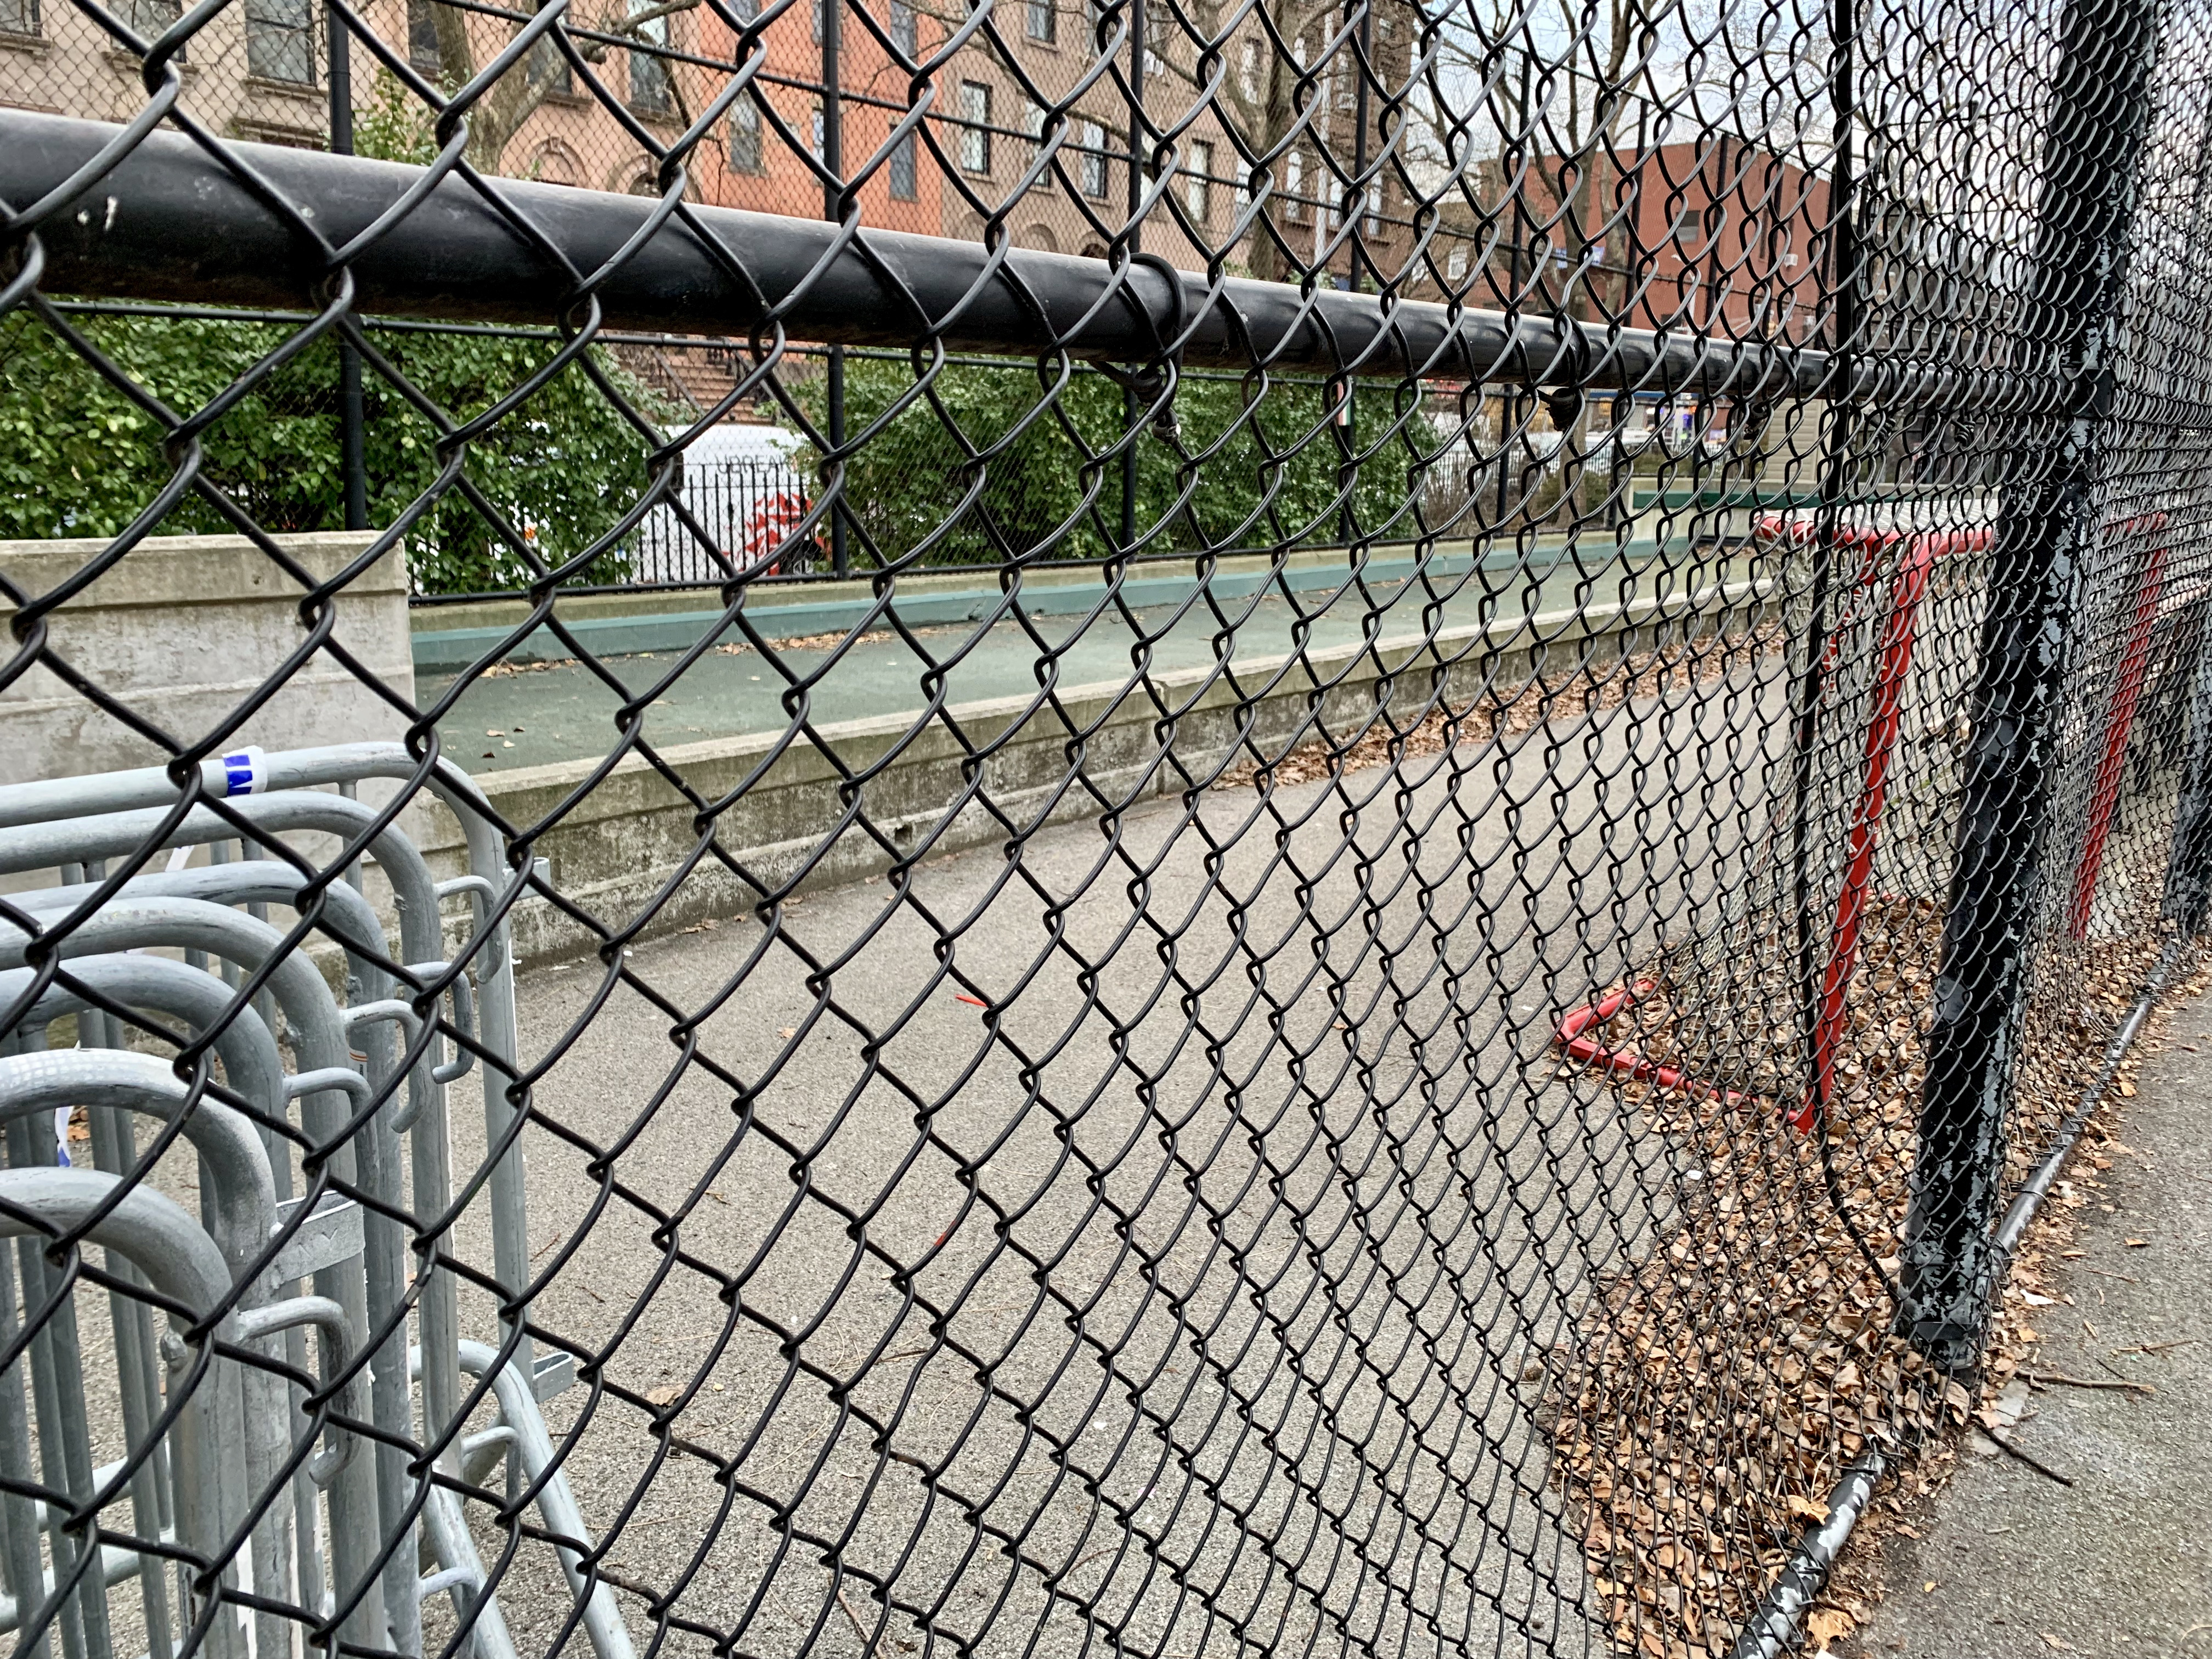 The bocce court behind this fence may soon disappear. Photo: Mary Frost/Brooklyn Eagle